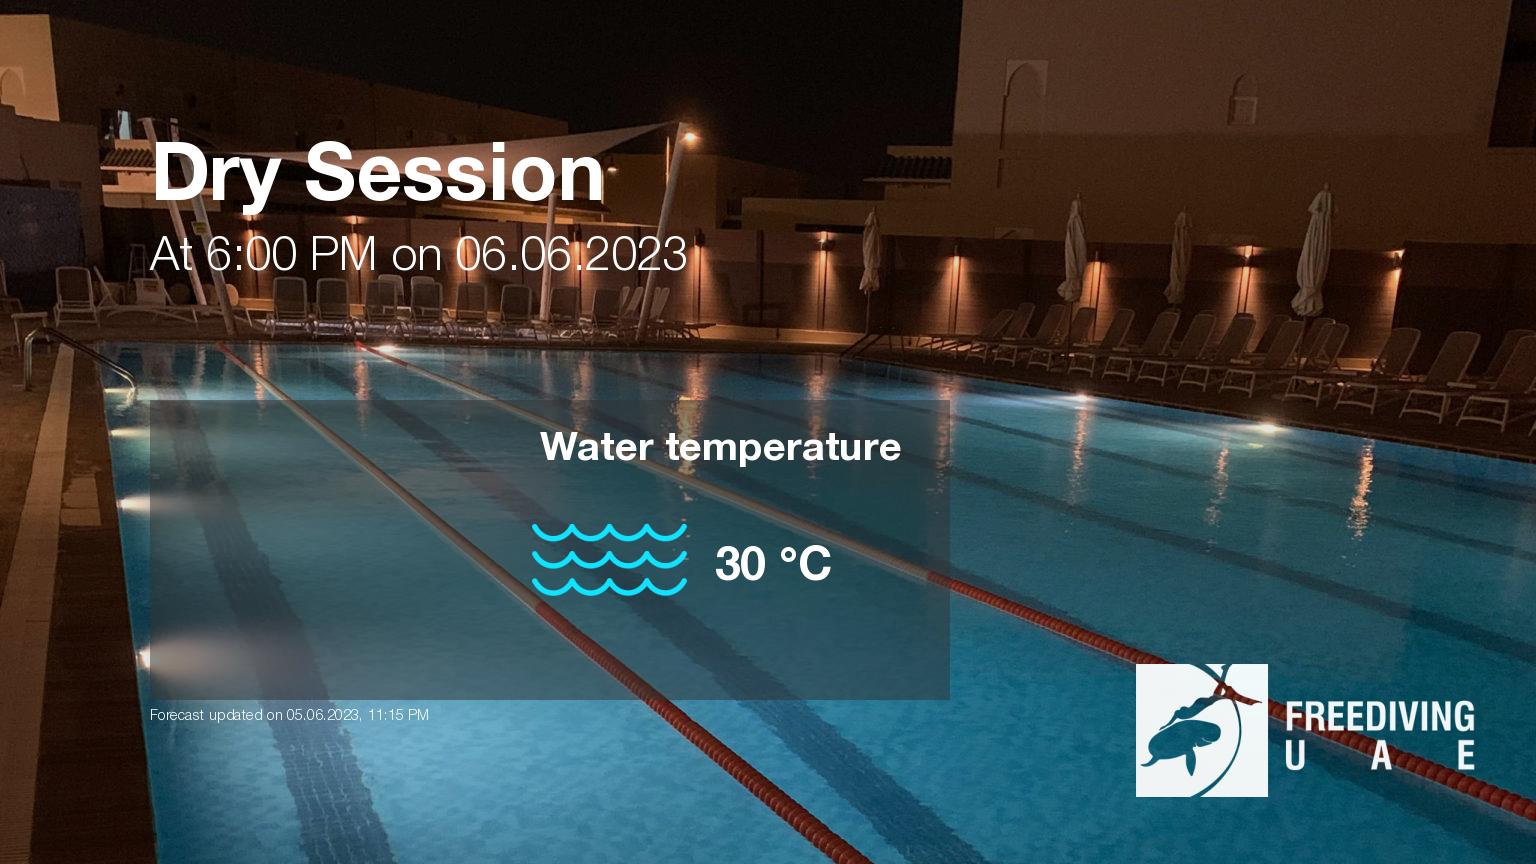 Expected weather during Dry Session on Tue, Jun 6, at 6:00 PM